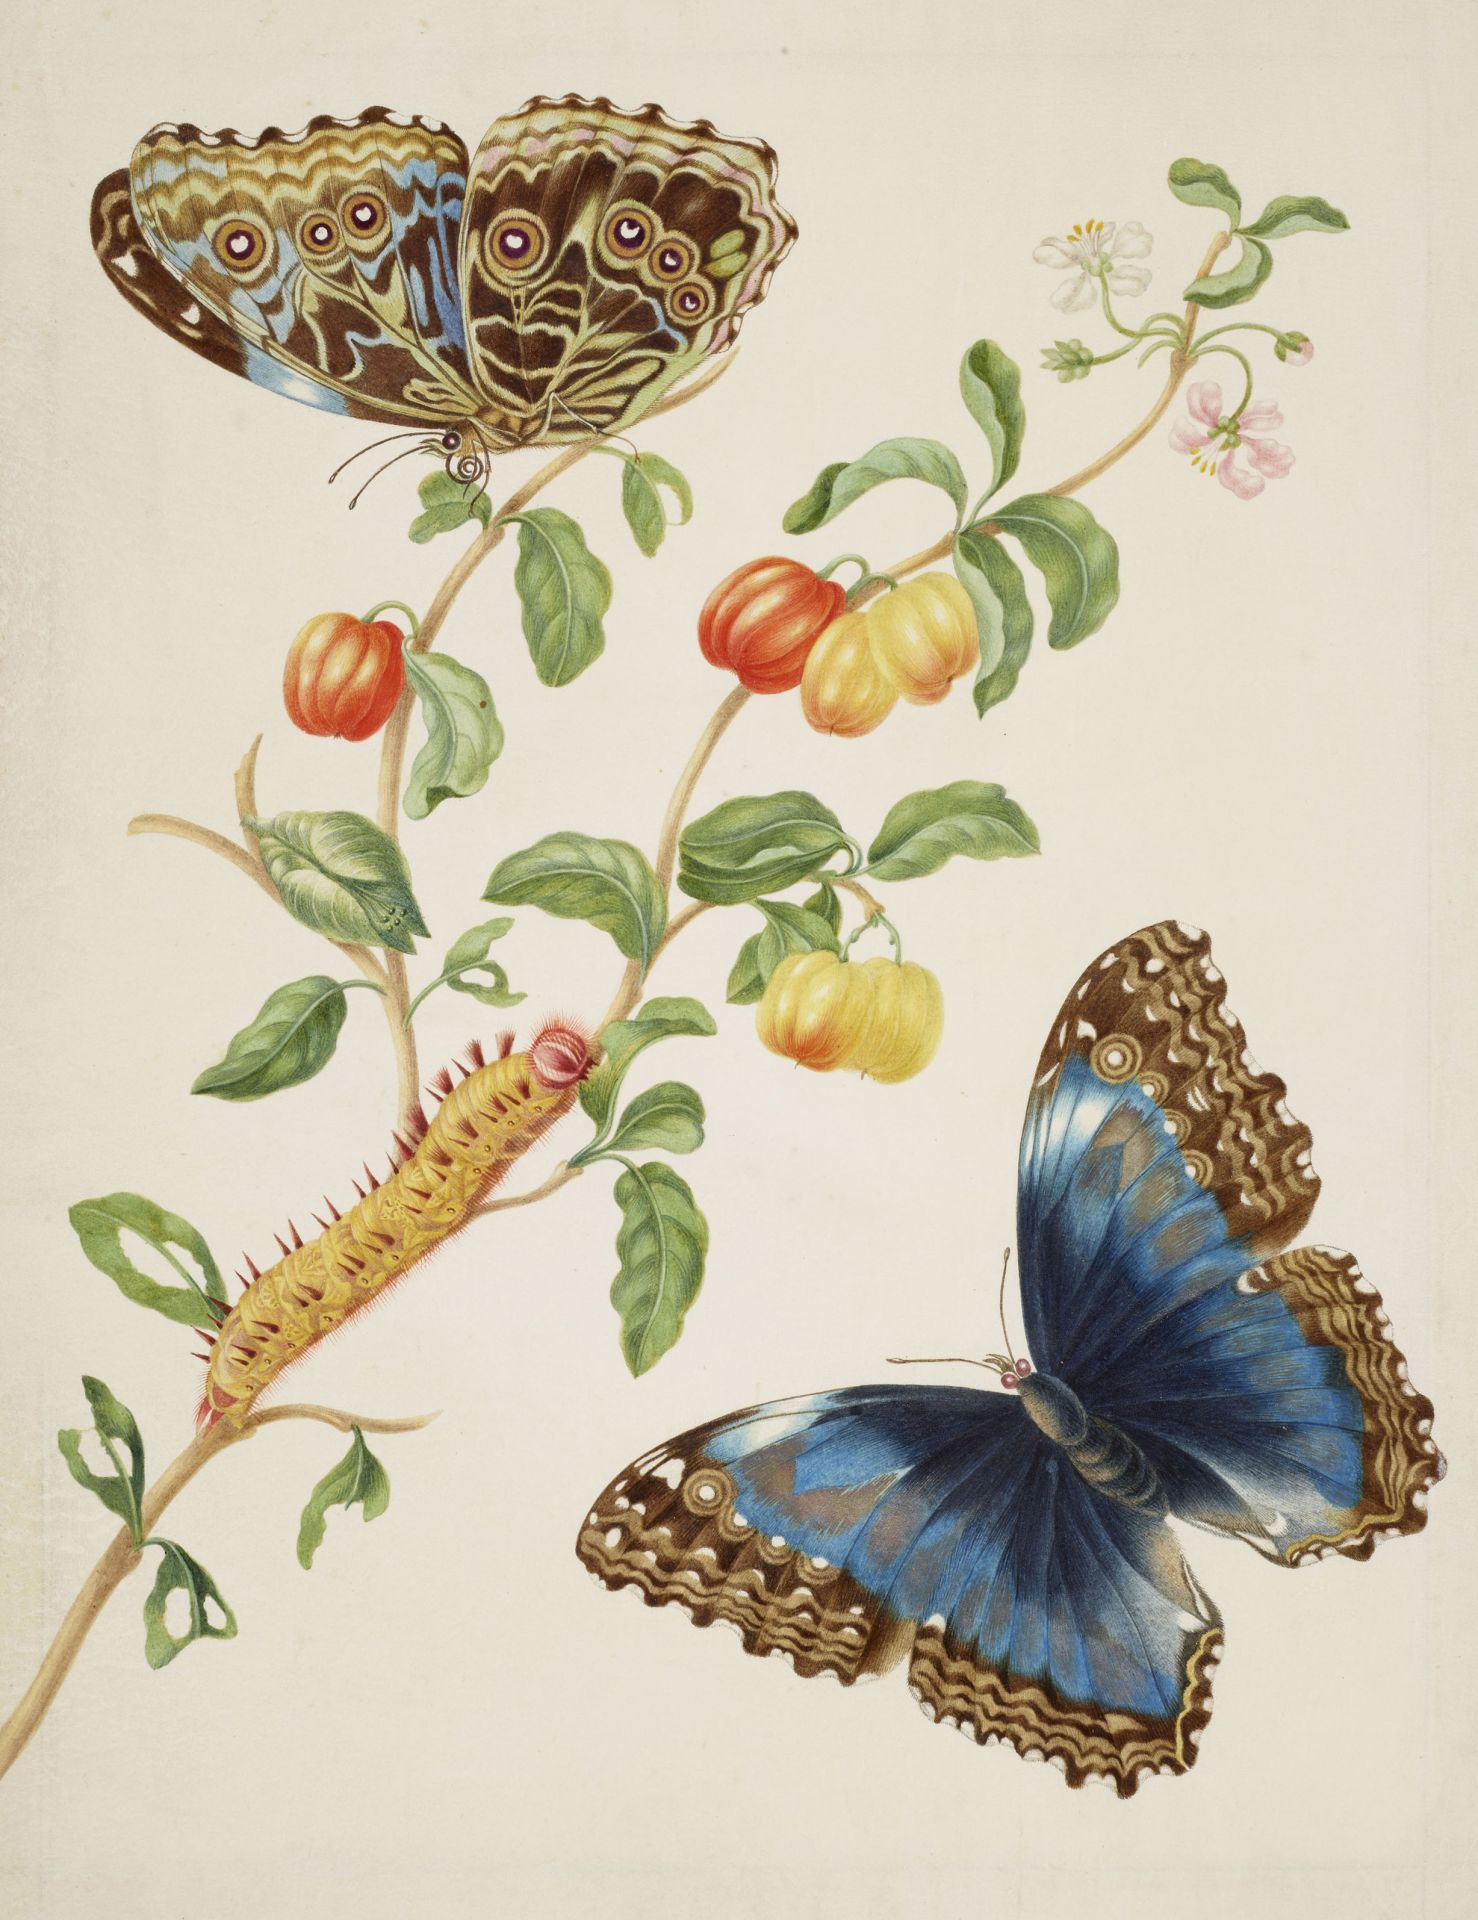 Branch of West Indian cherry with Achilles Morpho butterfly, 1701-05. Photo Credit: ©Royal Collection Trust/Her Majesty Queen Elizabeth II 2015.